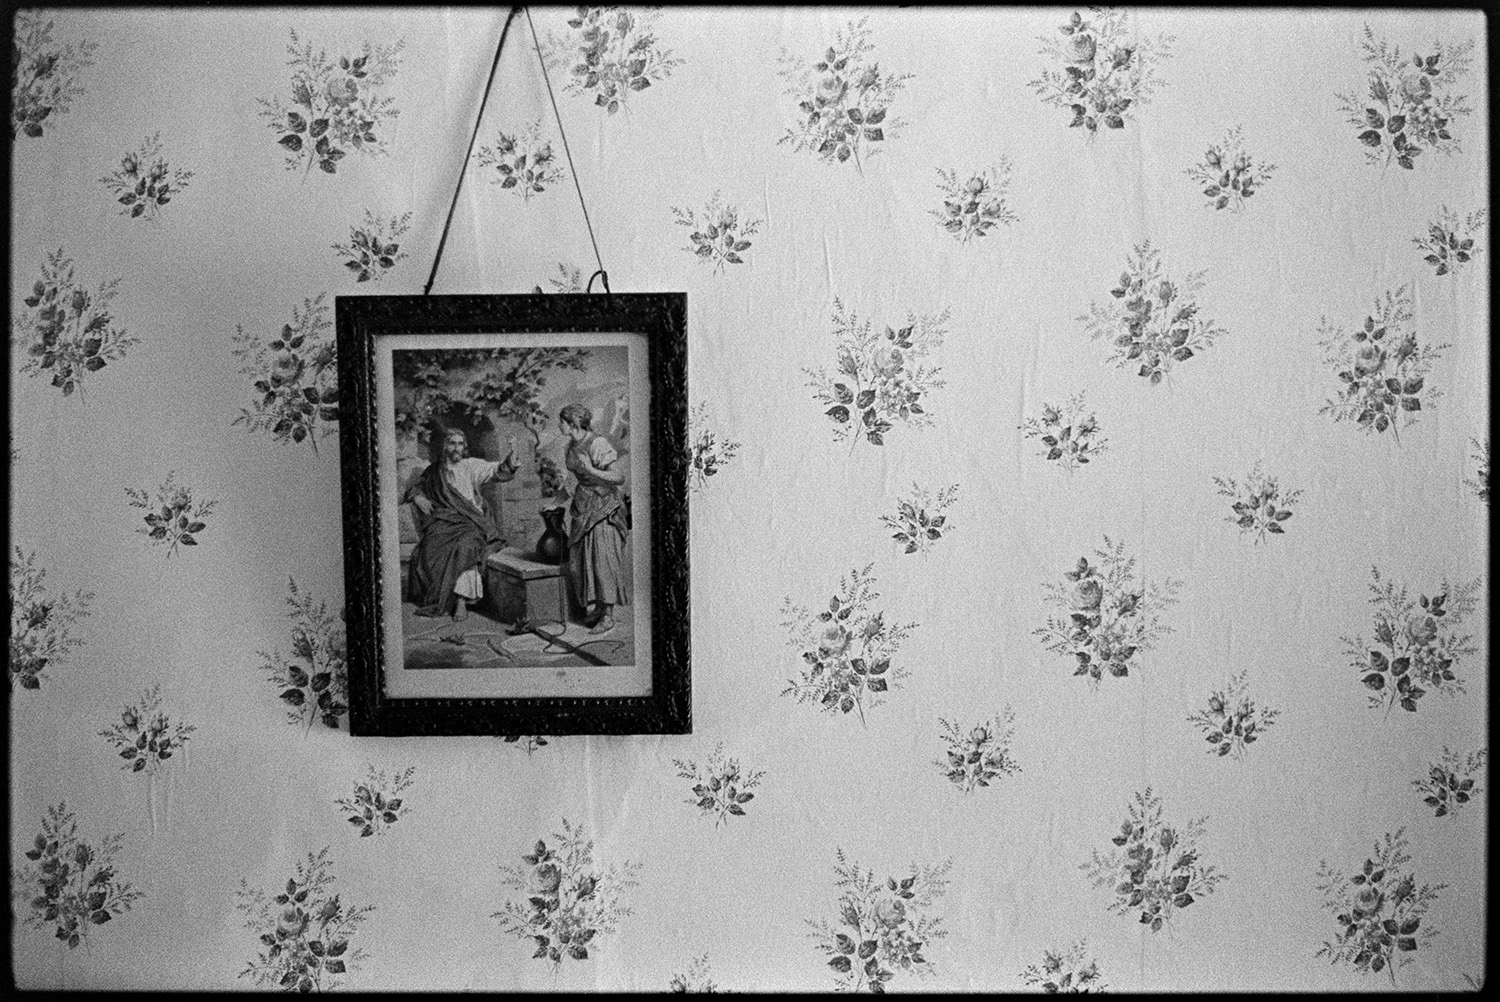 Religious picture on bedroom wall. 
[A religious framed picture hung on a wall in Emily Easterbrook's house at West Lane, Dolton. The wall is covered with floral patterned wallpaper.]